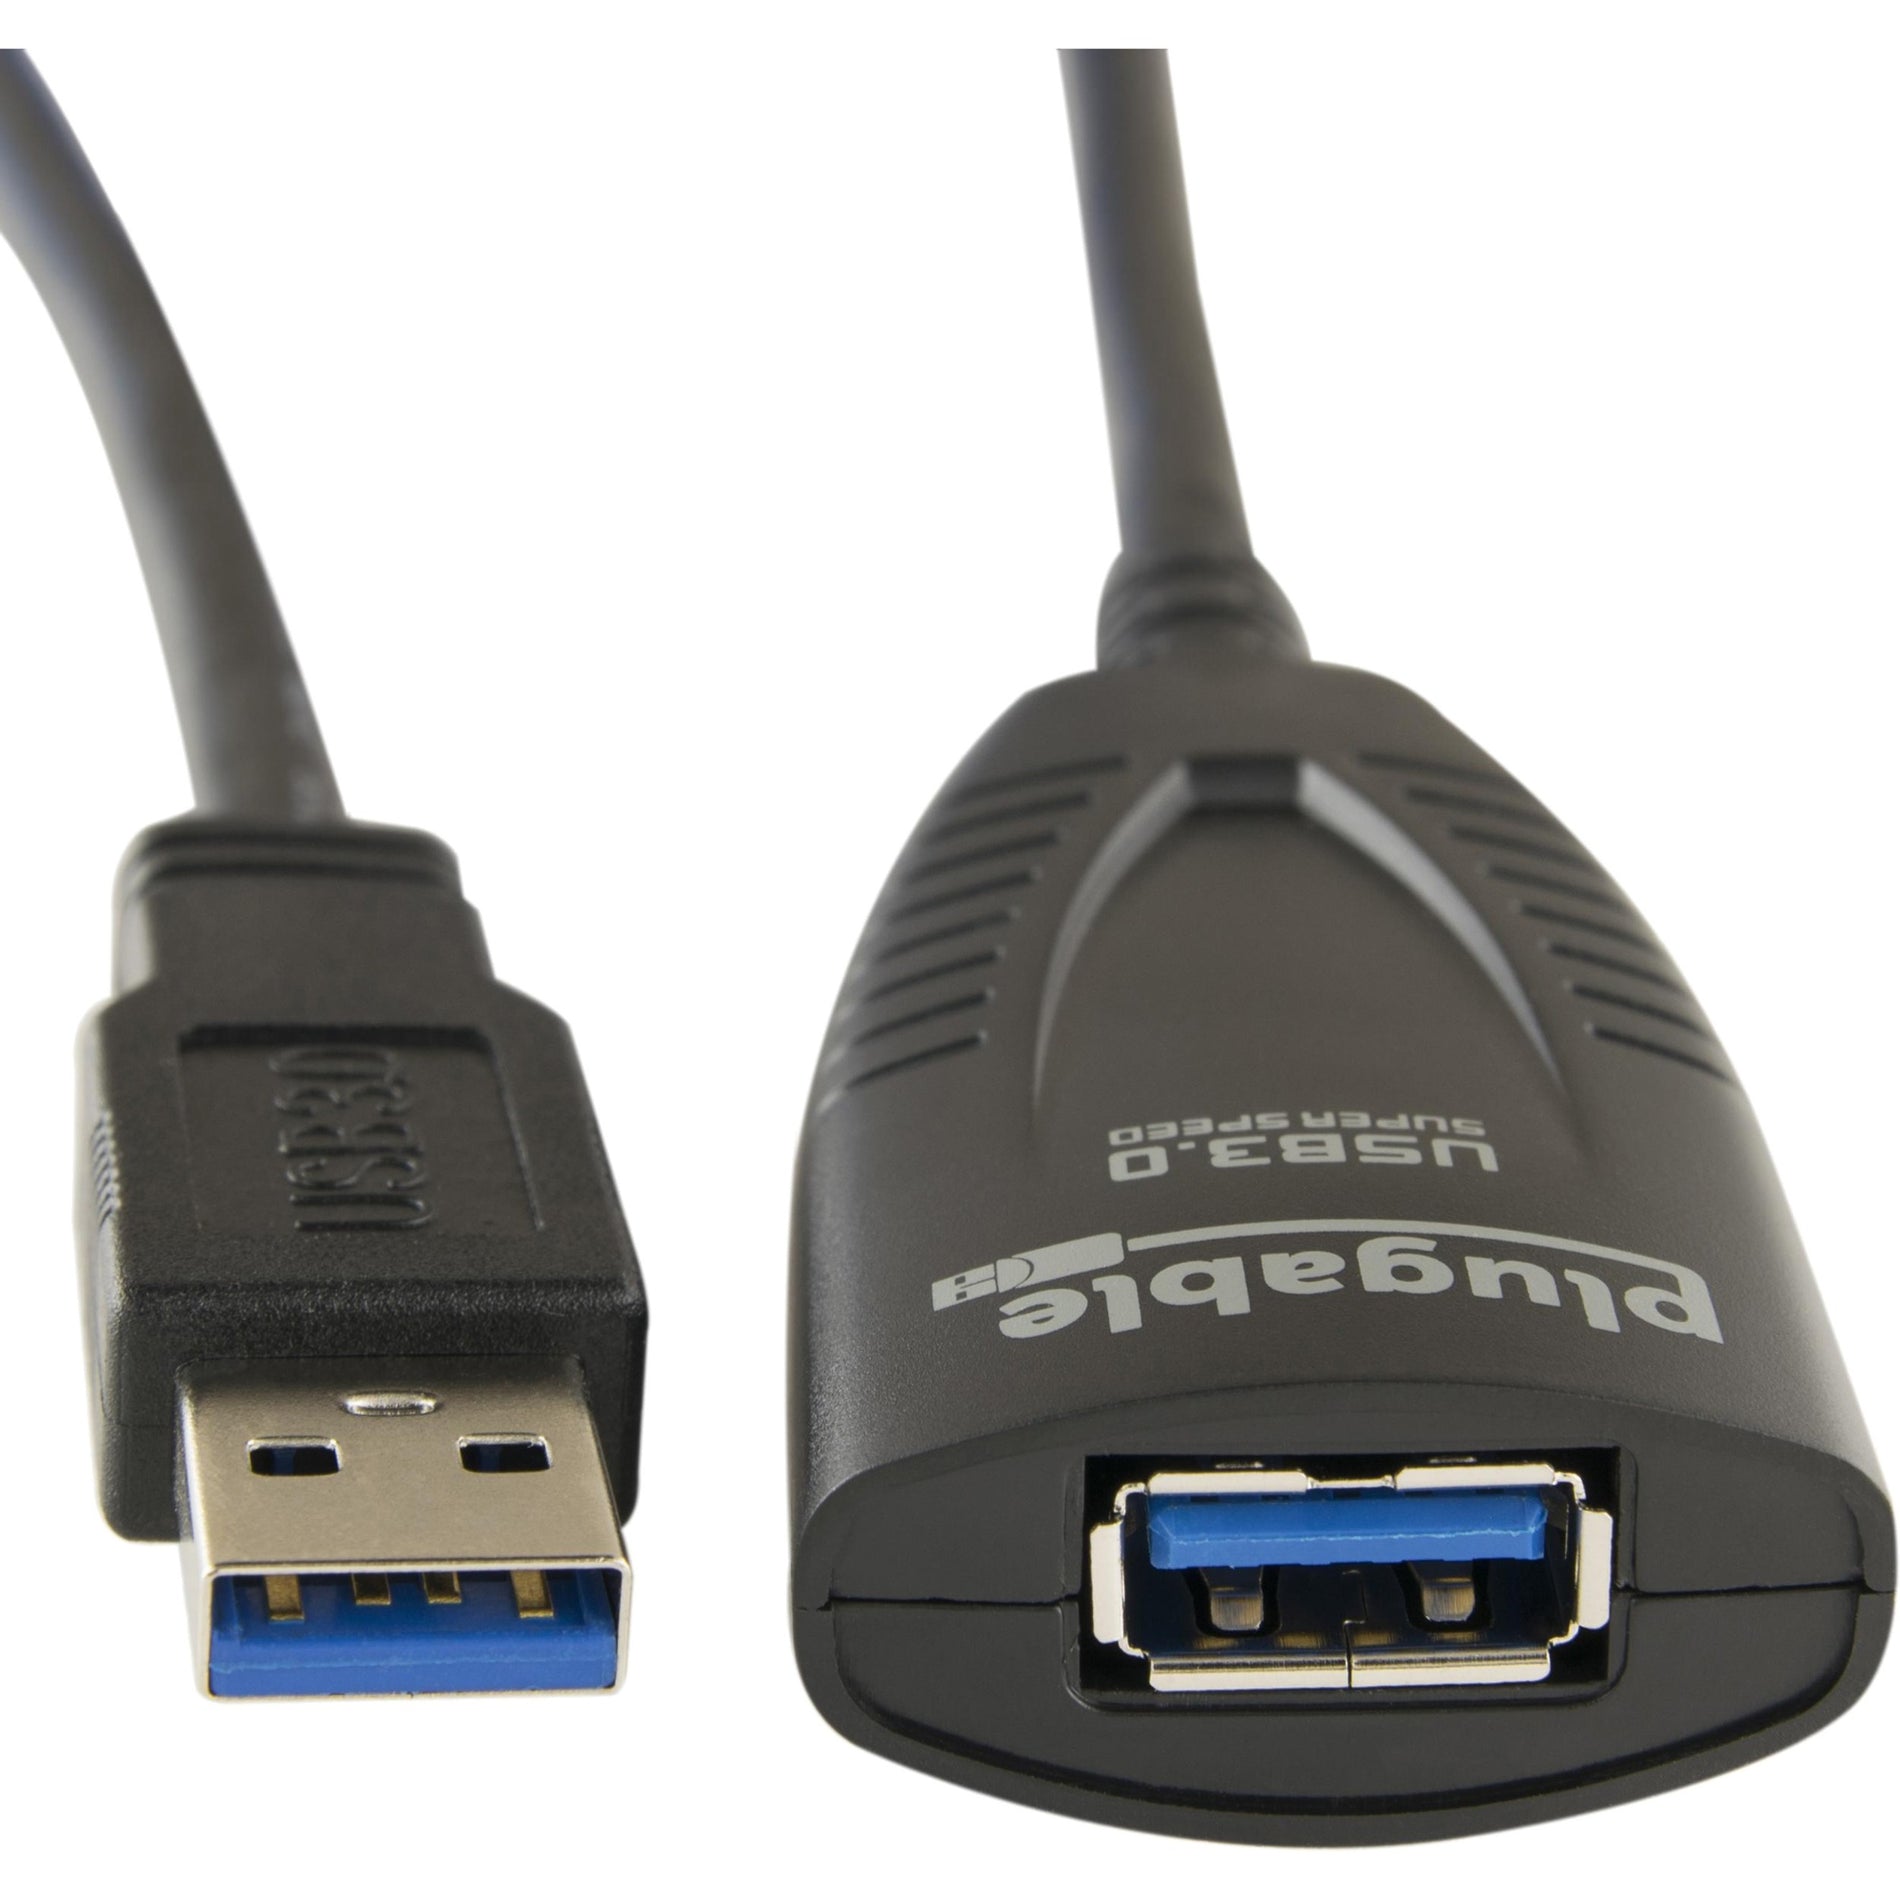 Plugable USB3-5M-D USB 3.0 5M (16ft) Extension Cable with Power Adapter, Extend Your USB Connection with Ease